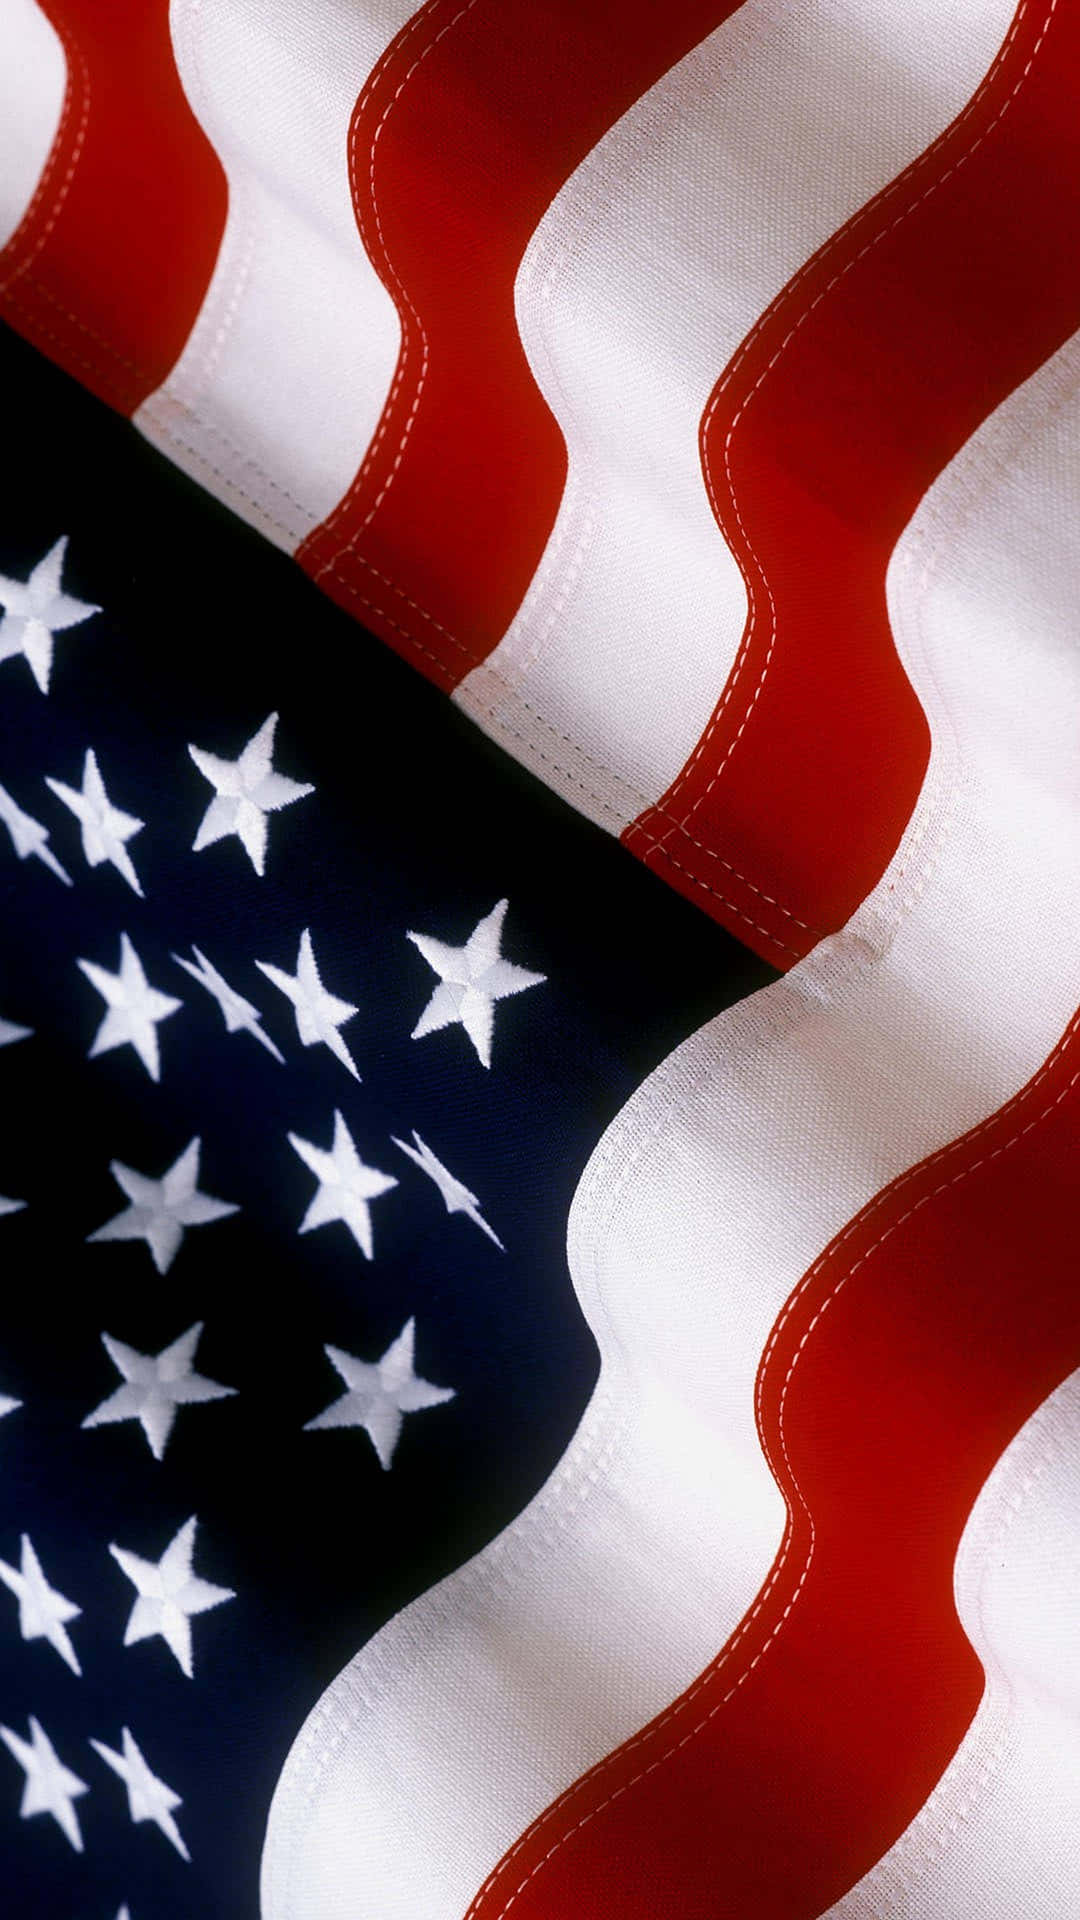 Celebrate the Land of the Brave with this American Flag background